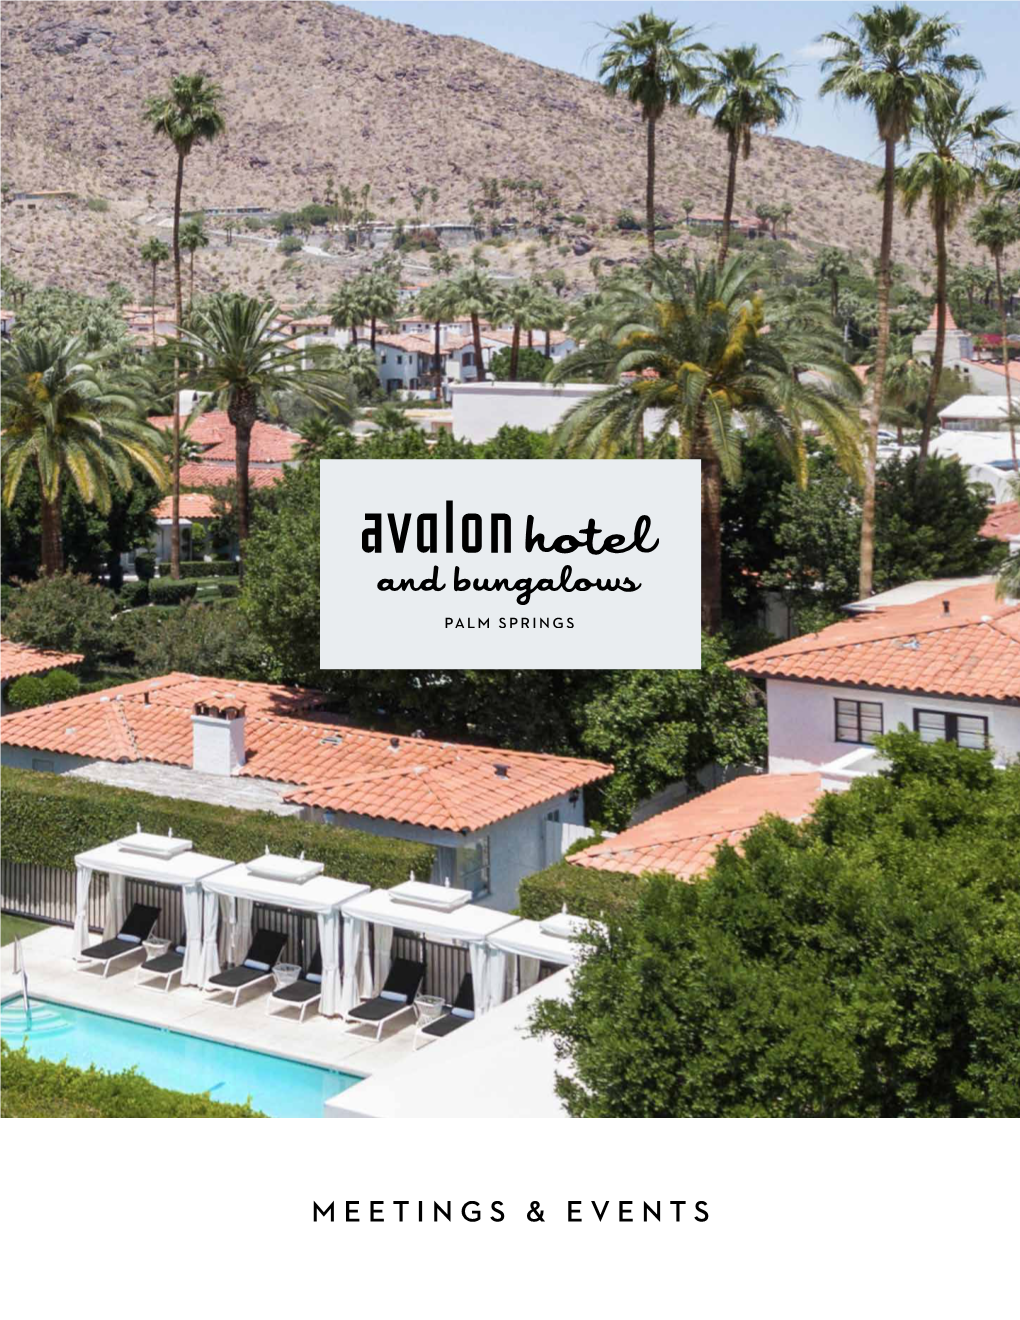 Avalon Hotel & Bungalows Palm Springs Meetings & Events